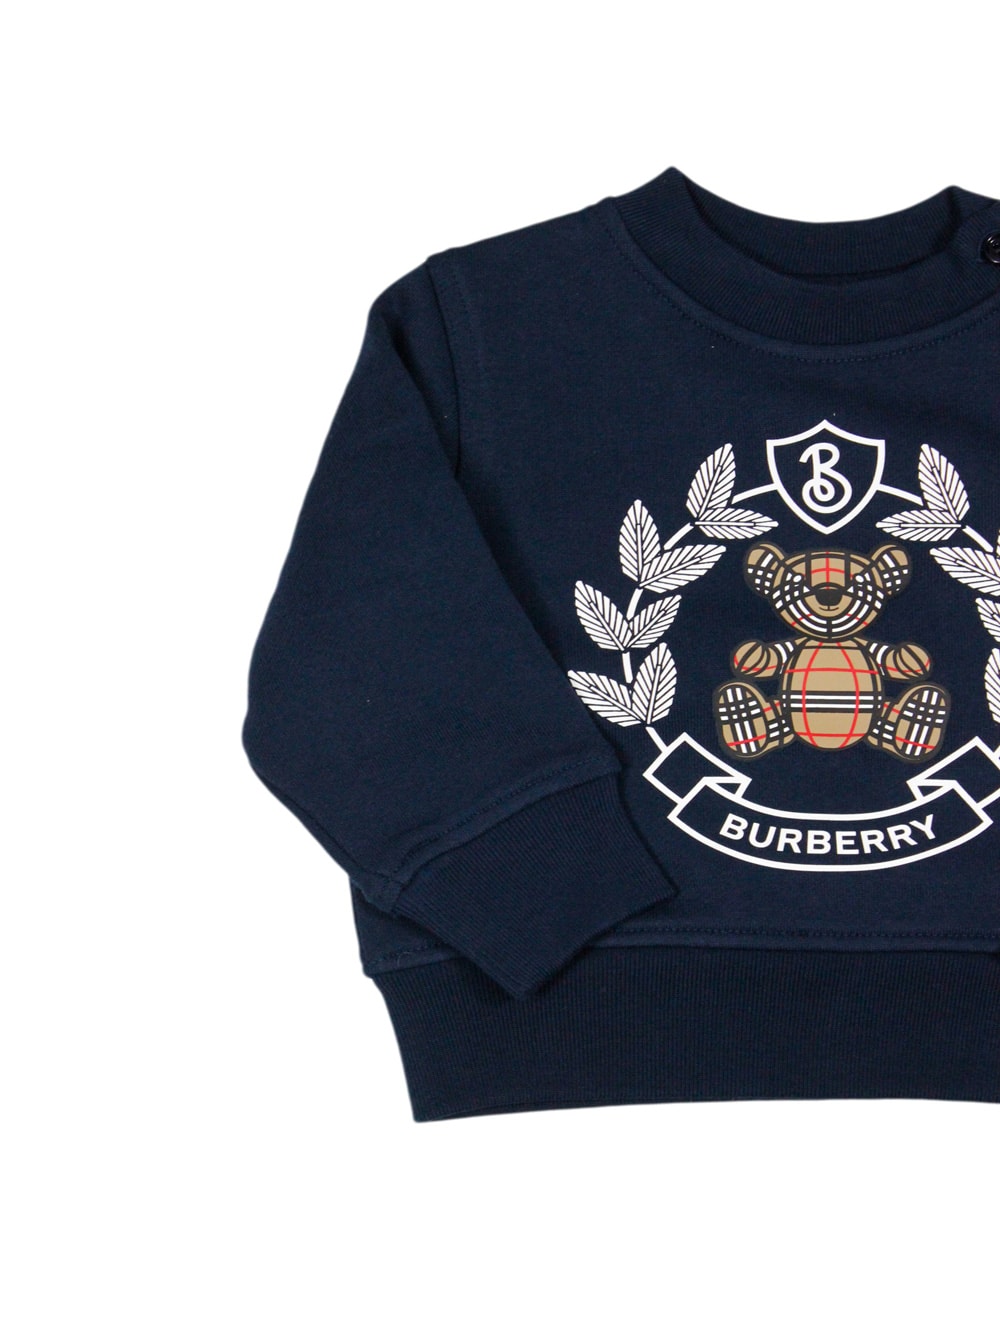 Shop Burberry Crewneck Sweatshirt With Buttons On The Neck In Cotton Jersey With Classic Check Teddy Bear Print On In Blu